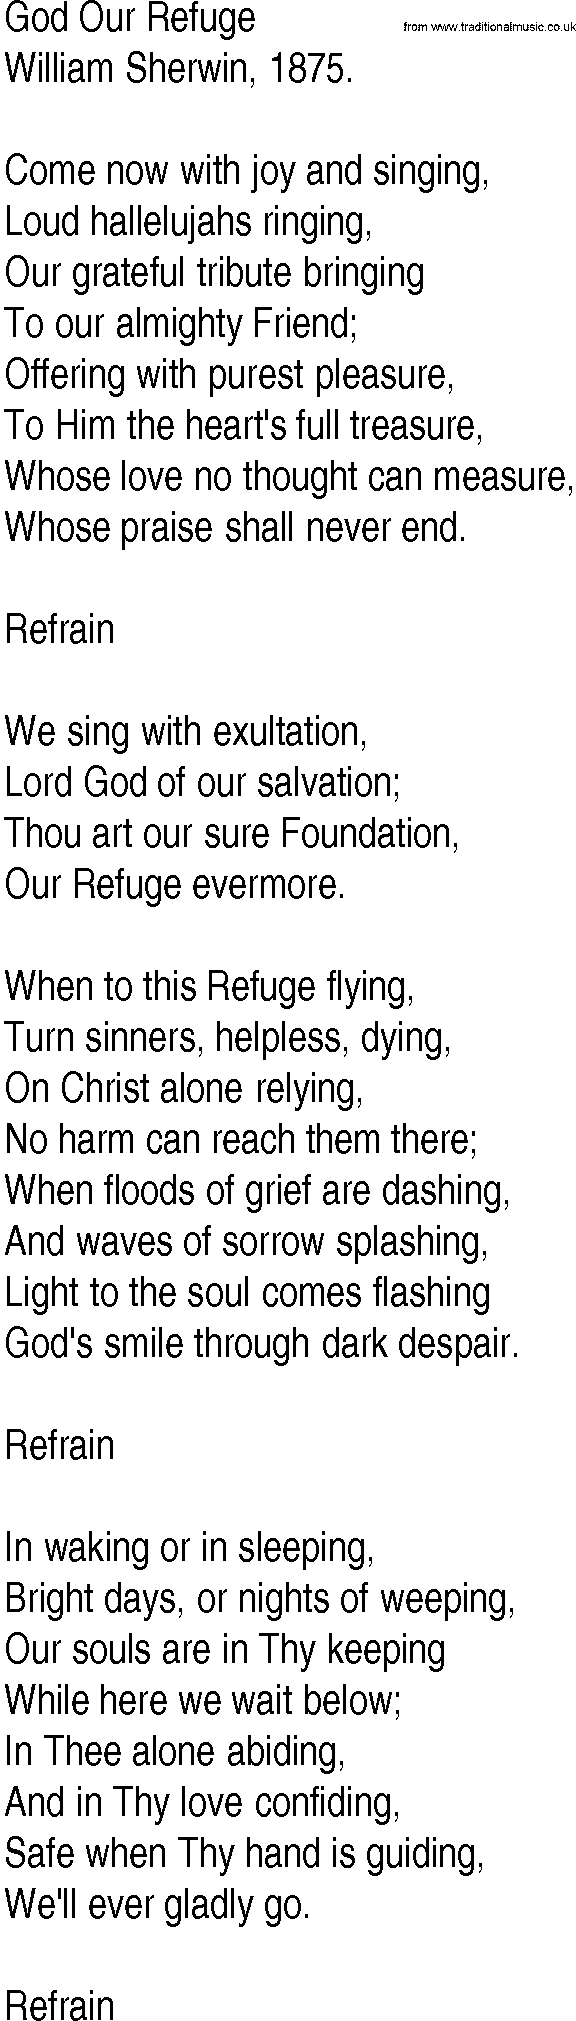 Hymn and Gospel Song: God Our Refuge by William Sherwin lyrics